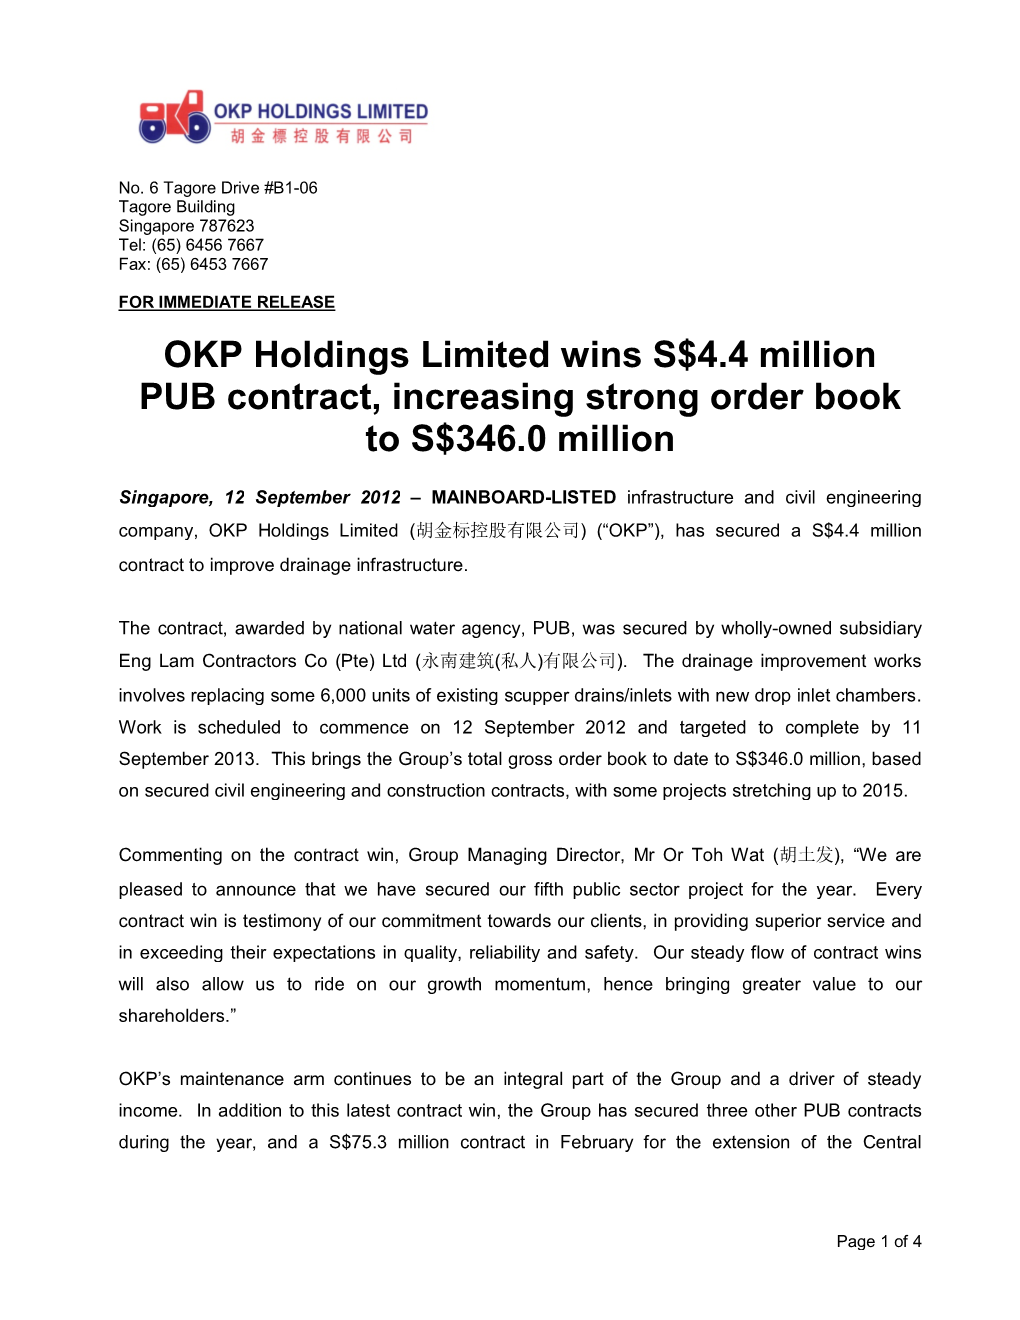 OKP Holdings Limited Wins S$4.4 Million PUB Contract, Increasing Strong Order Book to S$346.0 Million